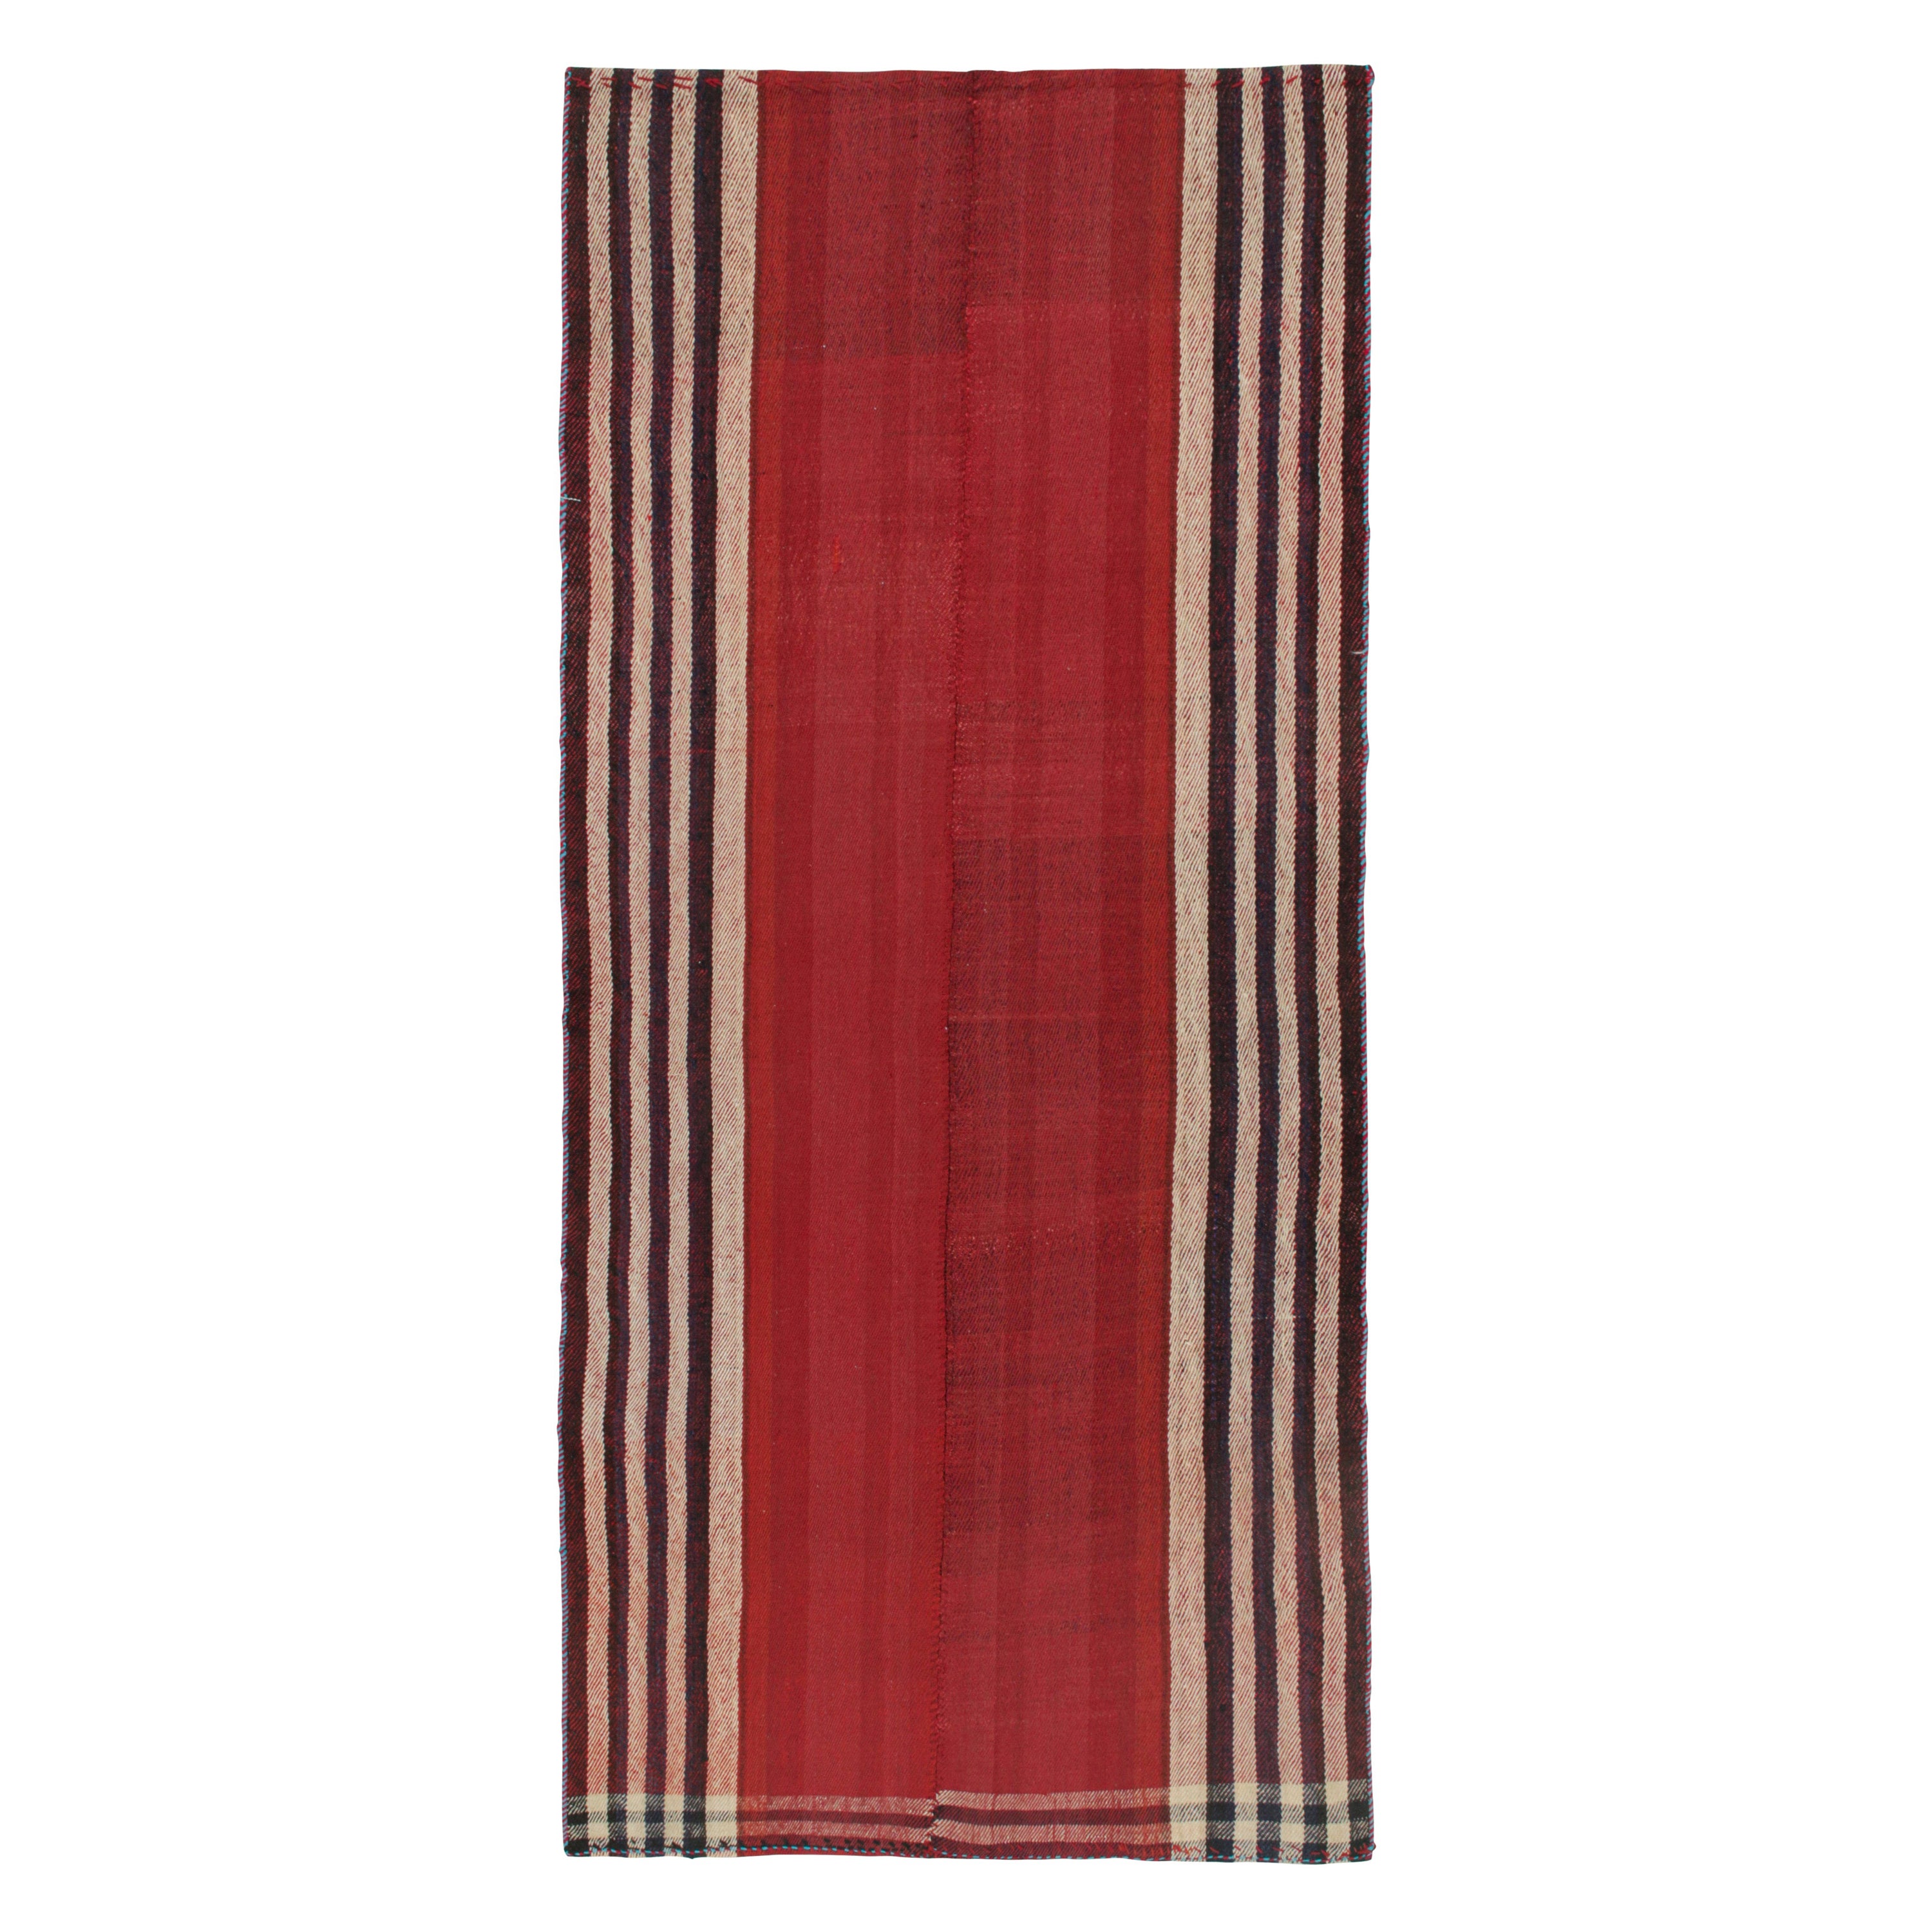 Vintage Persian Kilim Runner in Red with Blue and White Stripes by Rug & Kilim